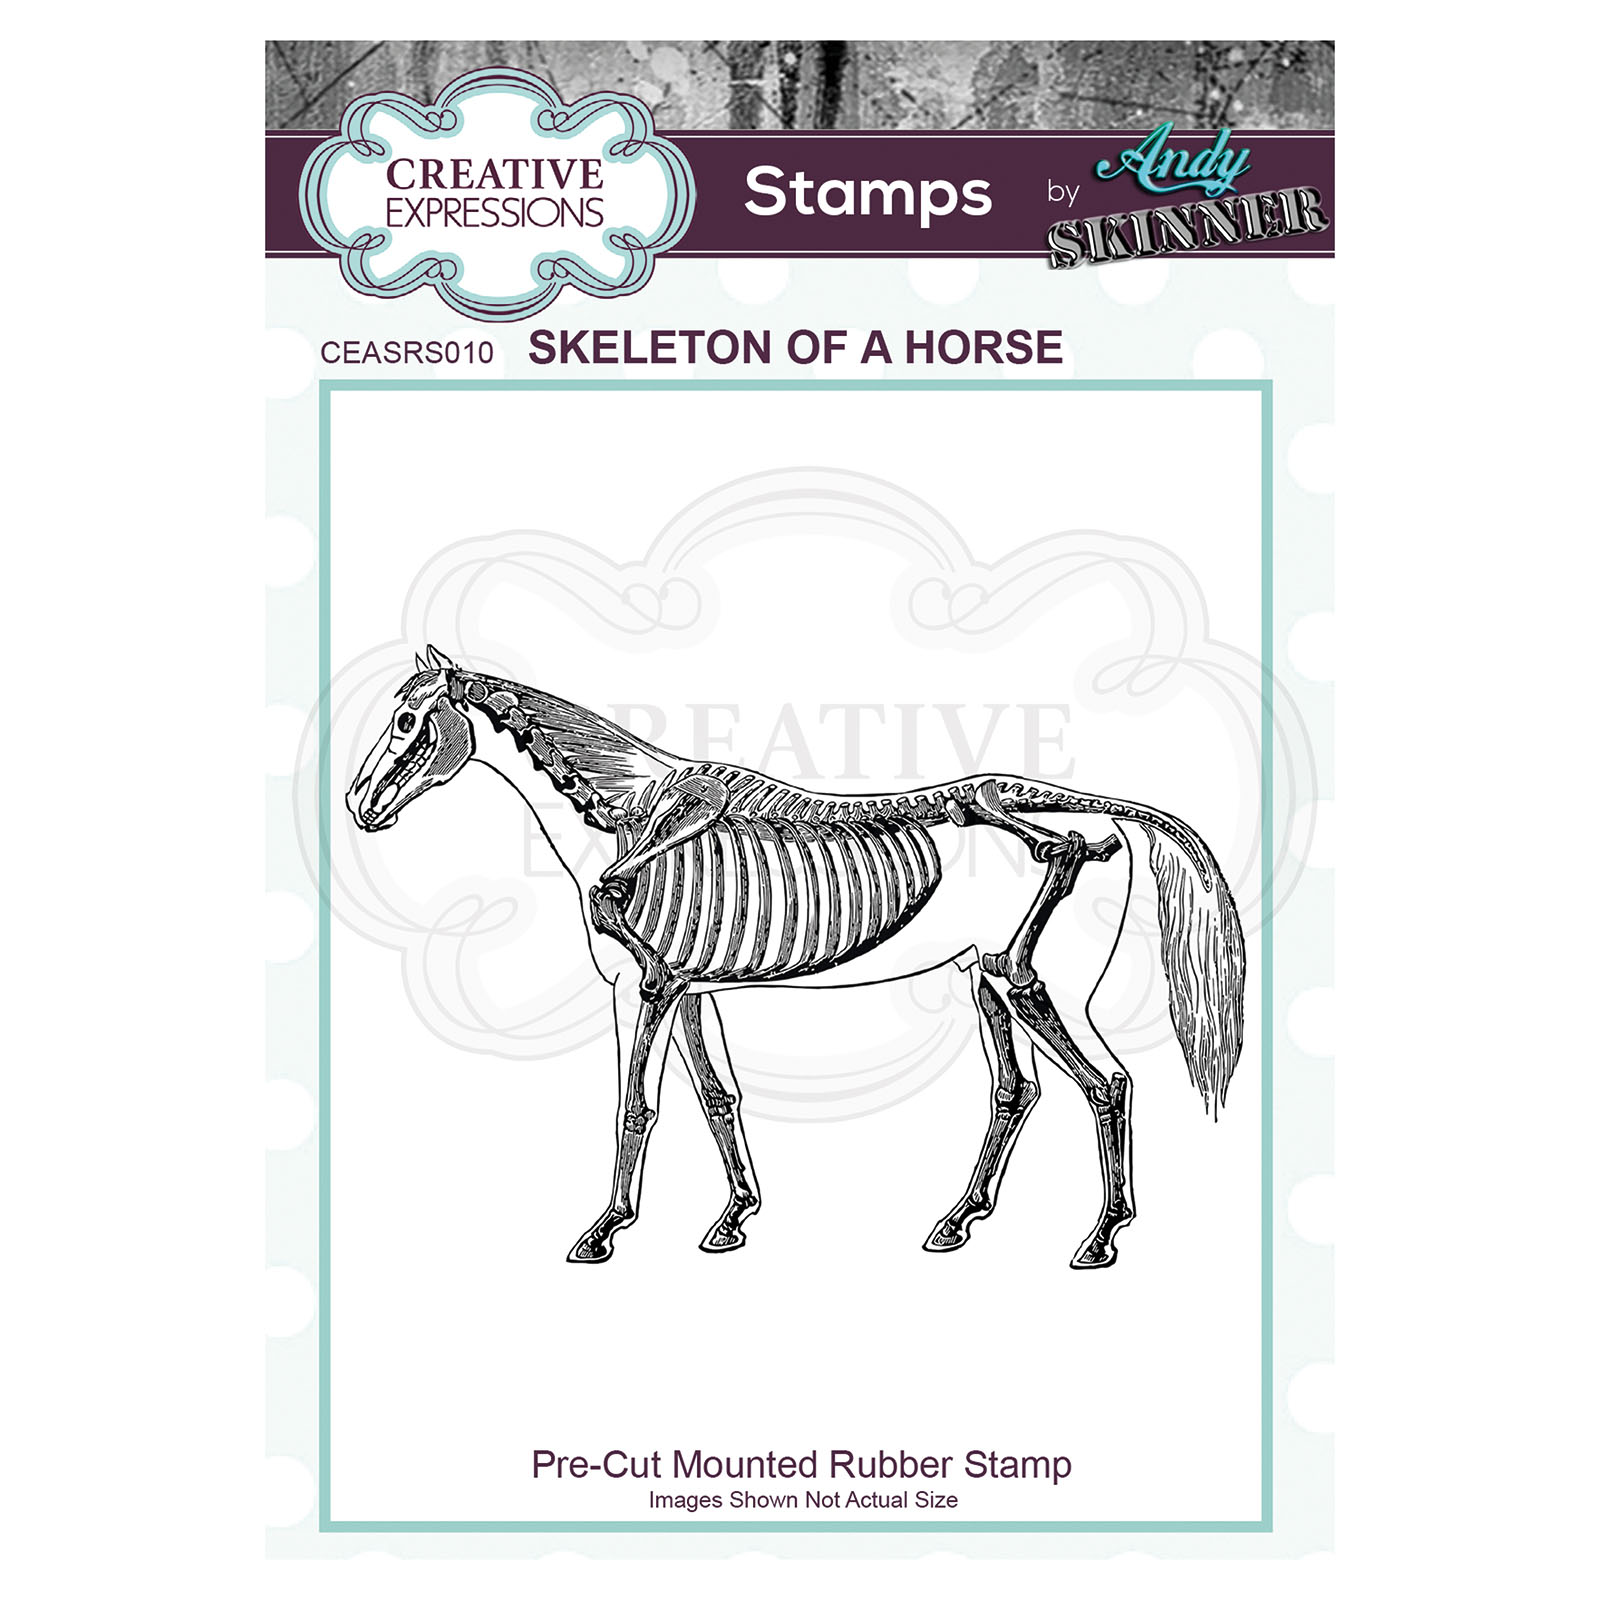 Creative Expressions • Pre Cut Rubber Stamp Andy Skinner Skeleton Horse